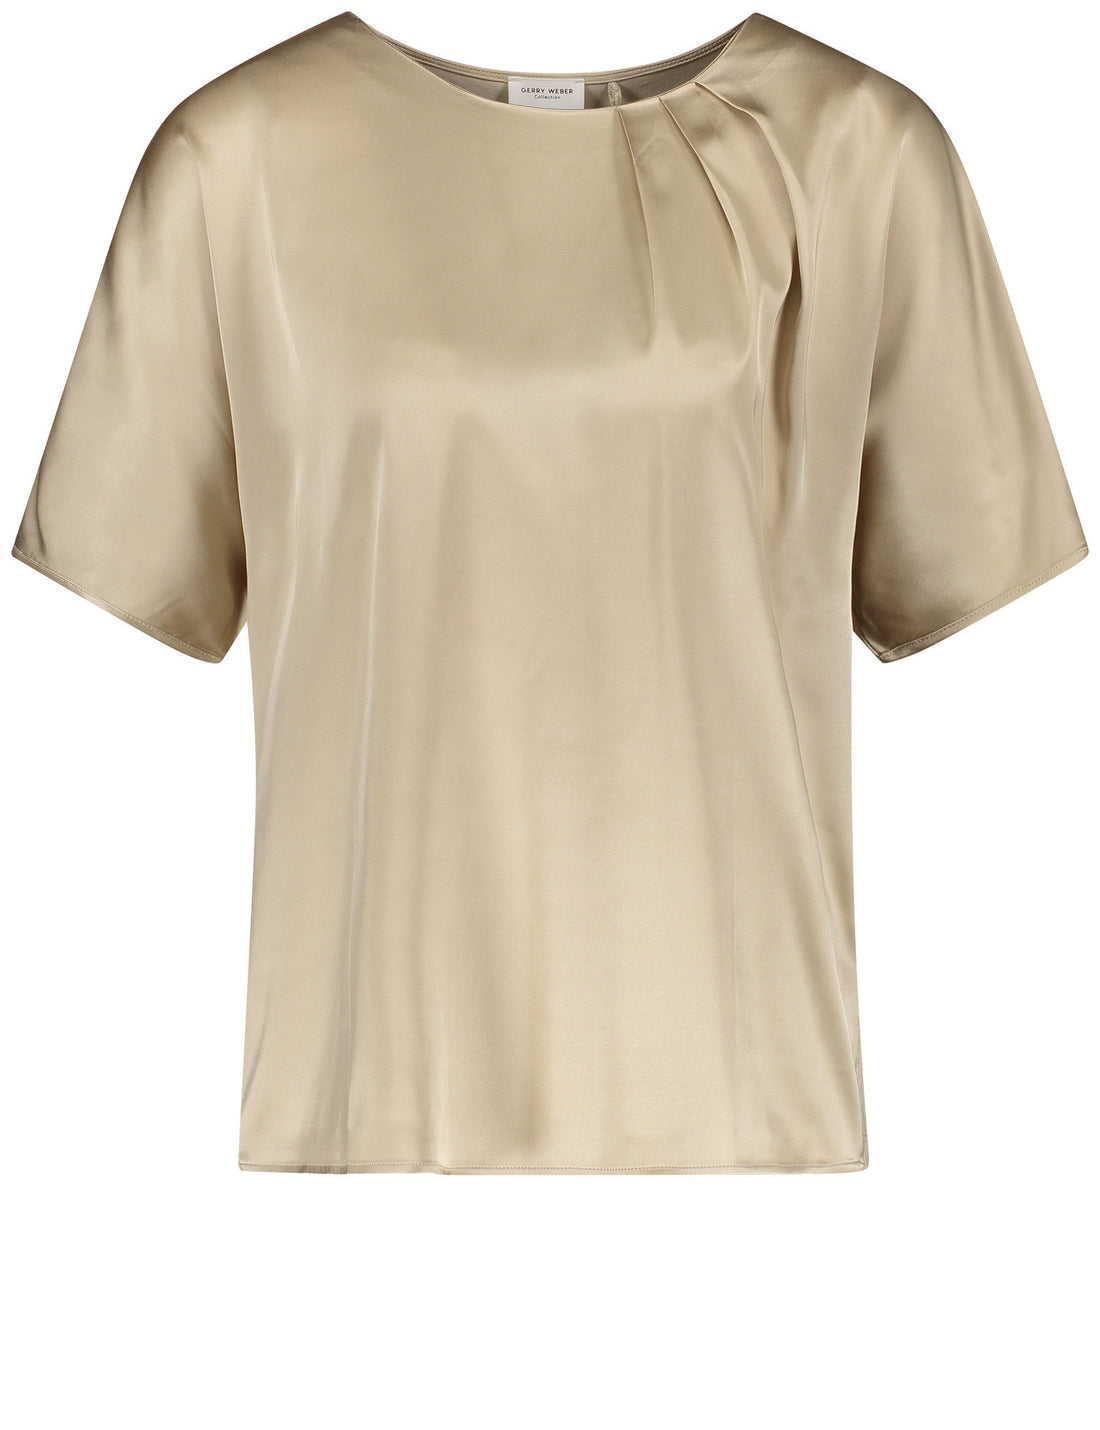 Flowing Blouse Top With Fabric Panelling_977047-35033_90138_01